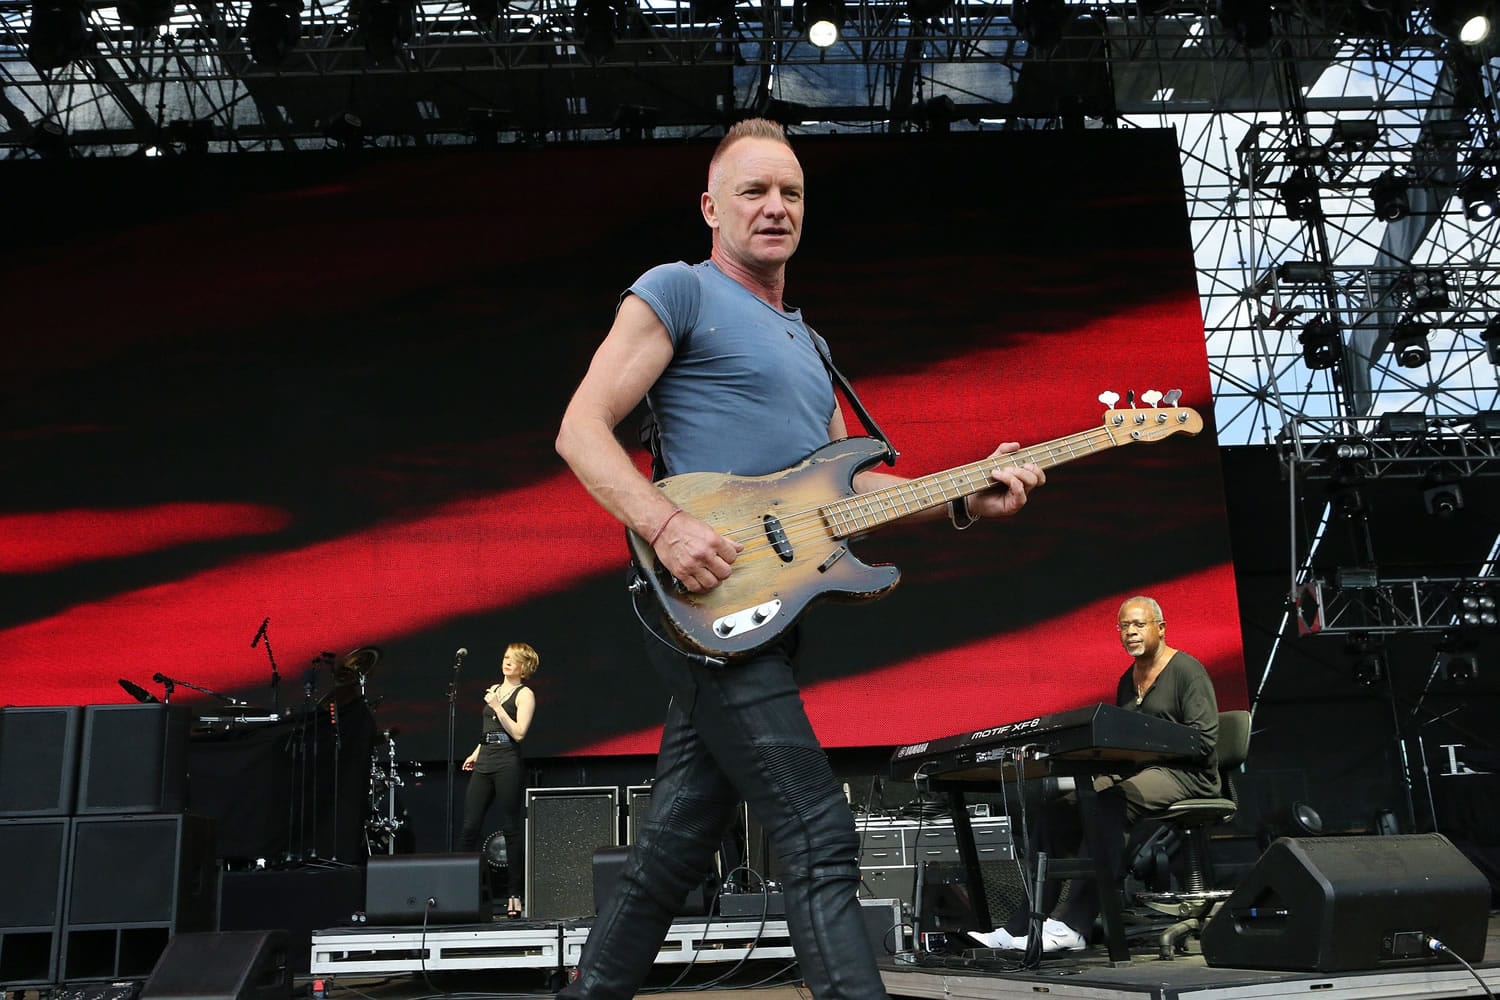 Sting
Nominated to the Rock and Roll Hall of Fame